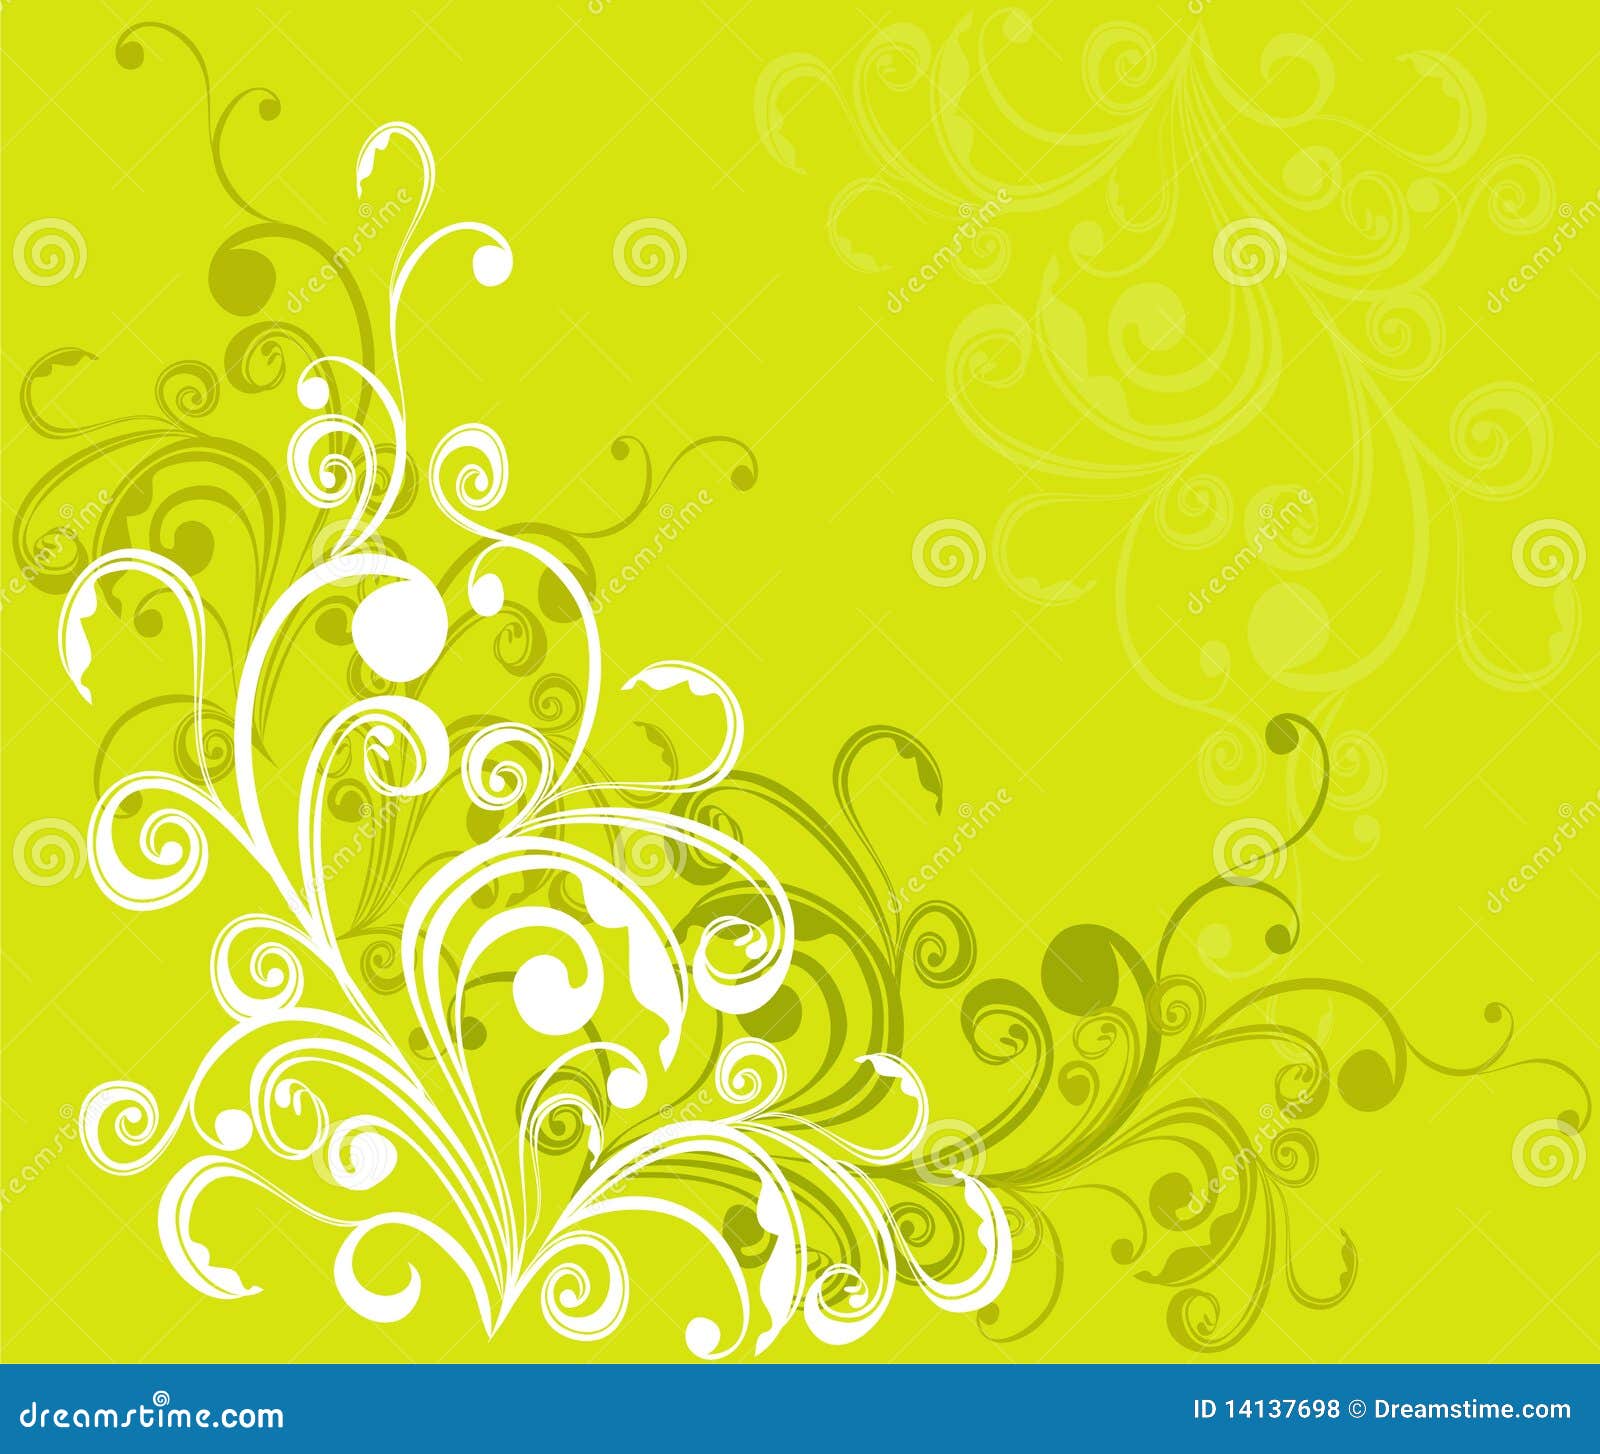 Summer vector background stock vector. Illustration of intricacy - 14137698